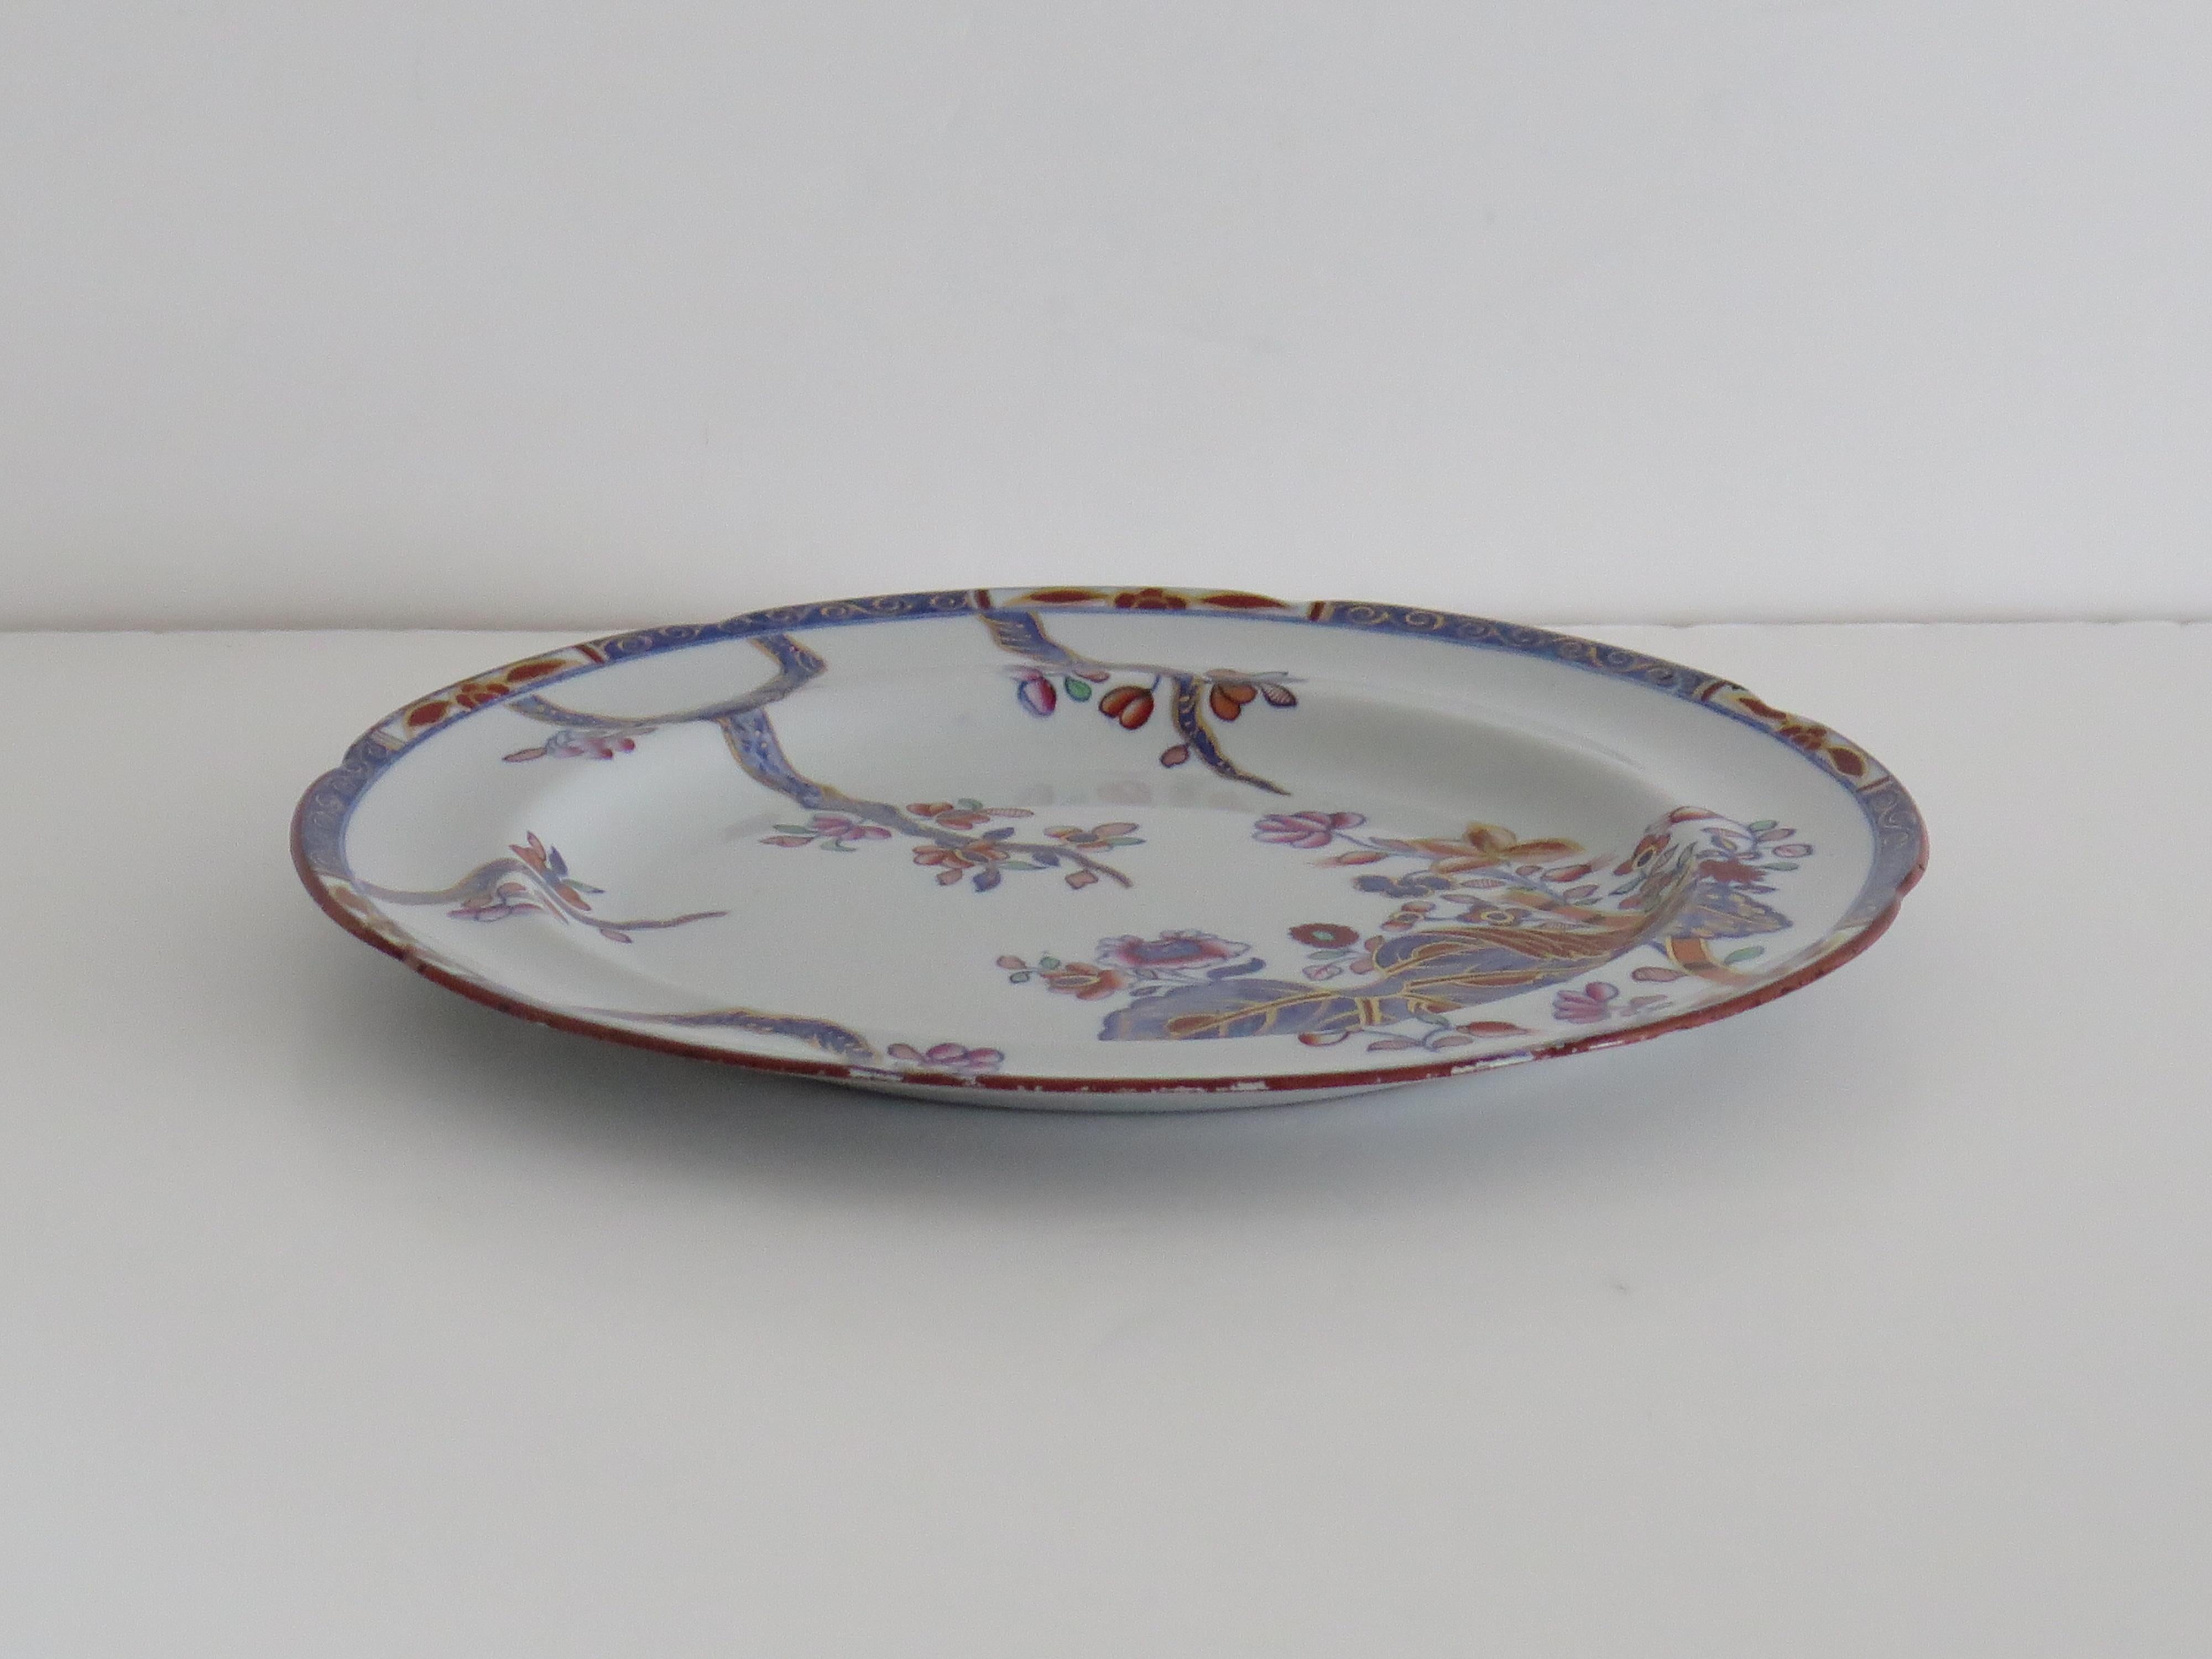 Hand-Painted Copeland Spode Stone China Dinner Plate Tobacco Leaf Pattern No. 2061, Ca 1880